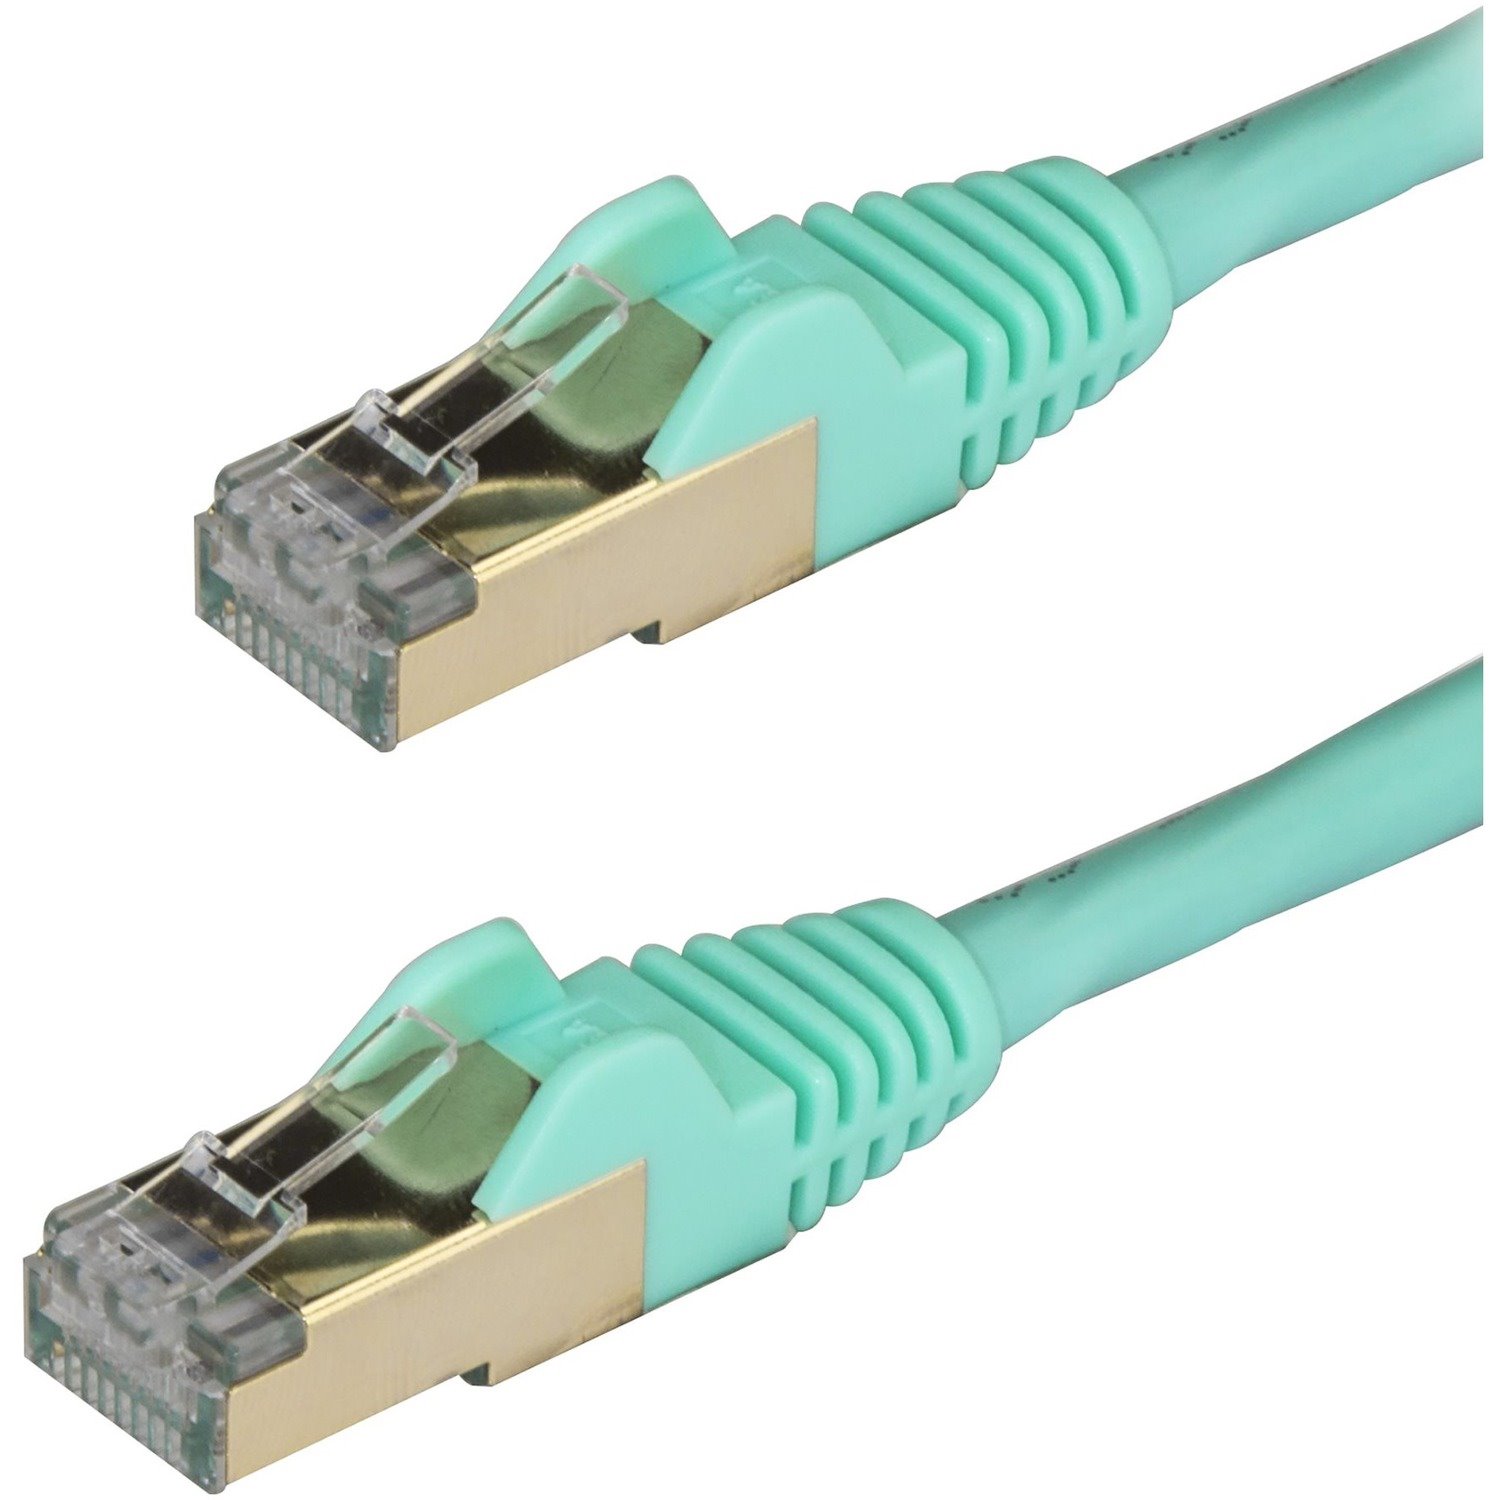 StarTech.com 50 cm Category 6a Network Cable for PoE-enabled Device, Computer, Hub, Router, Patch Panel - 1